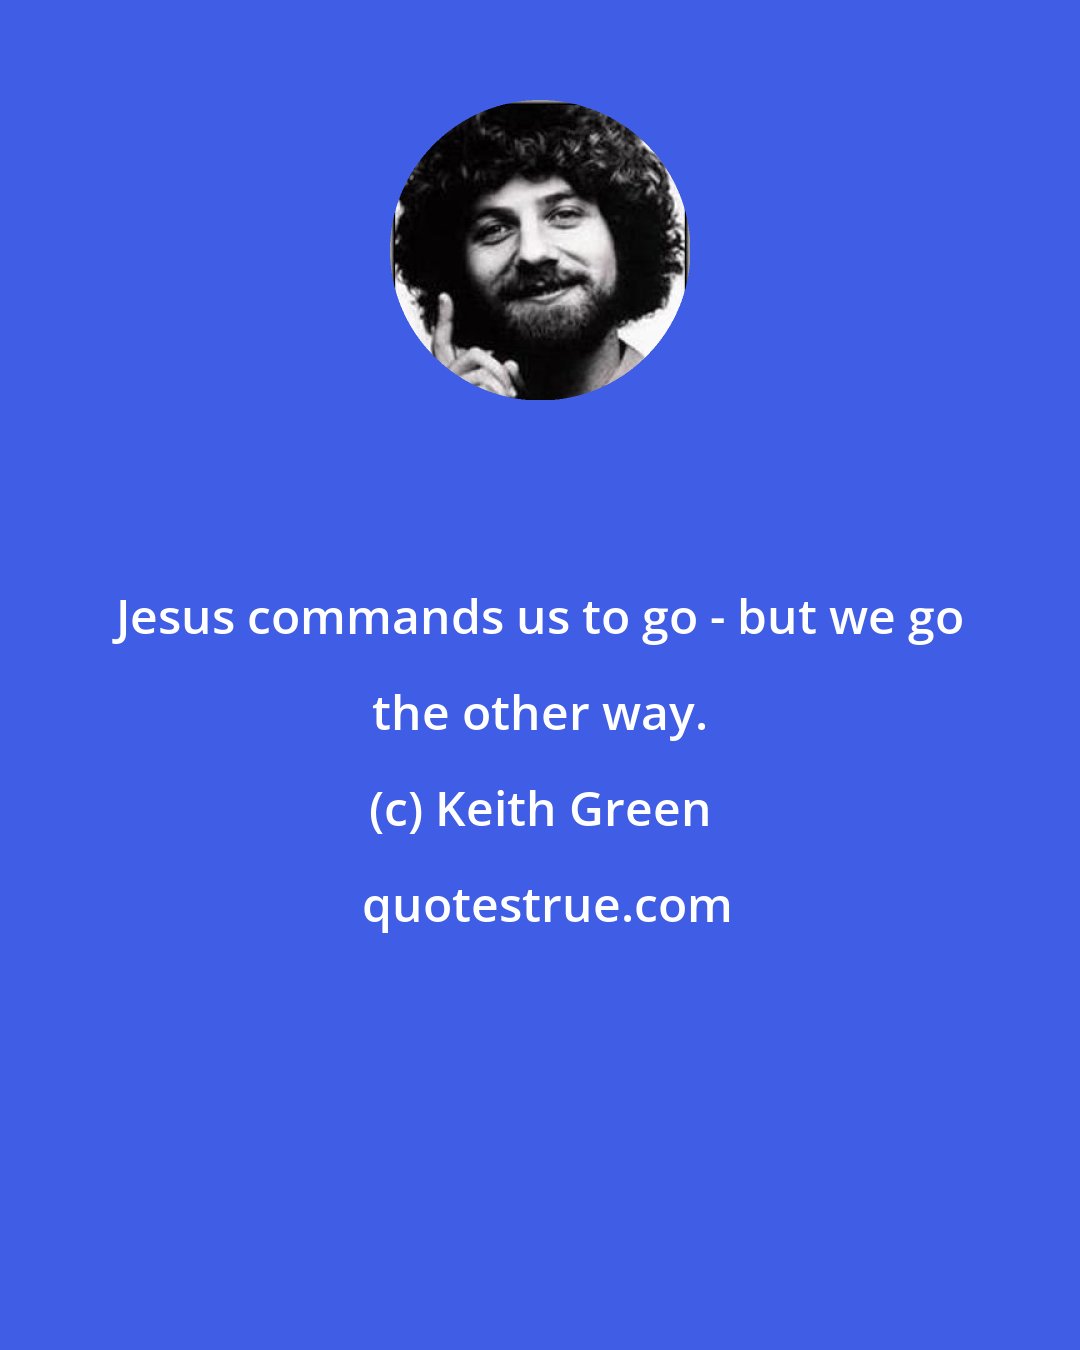 Keith Green: Jesus commands us to go - but we go the other way.